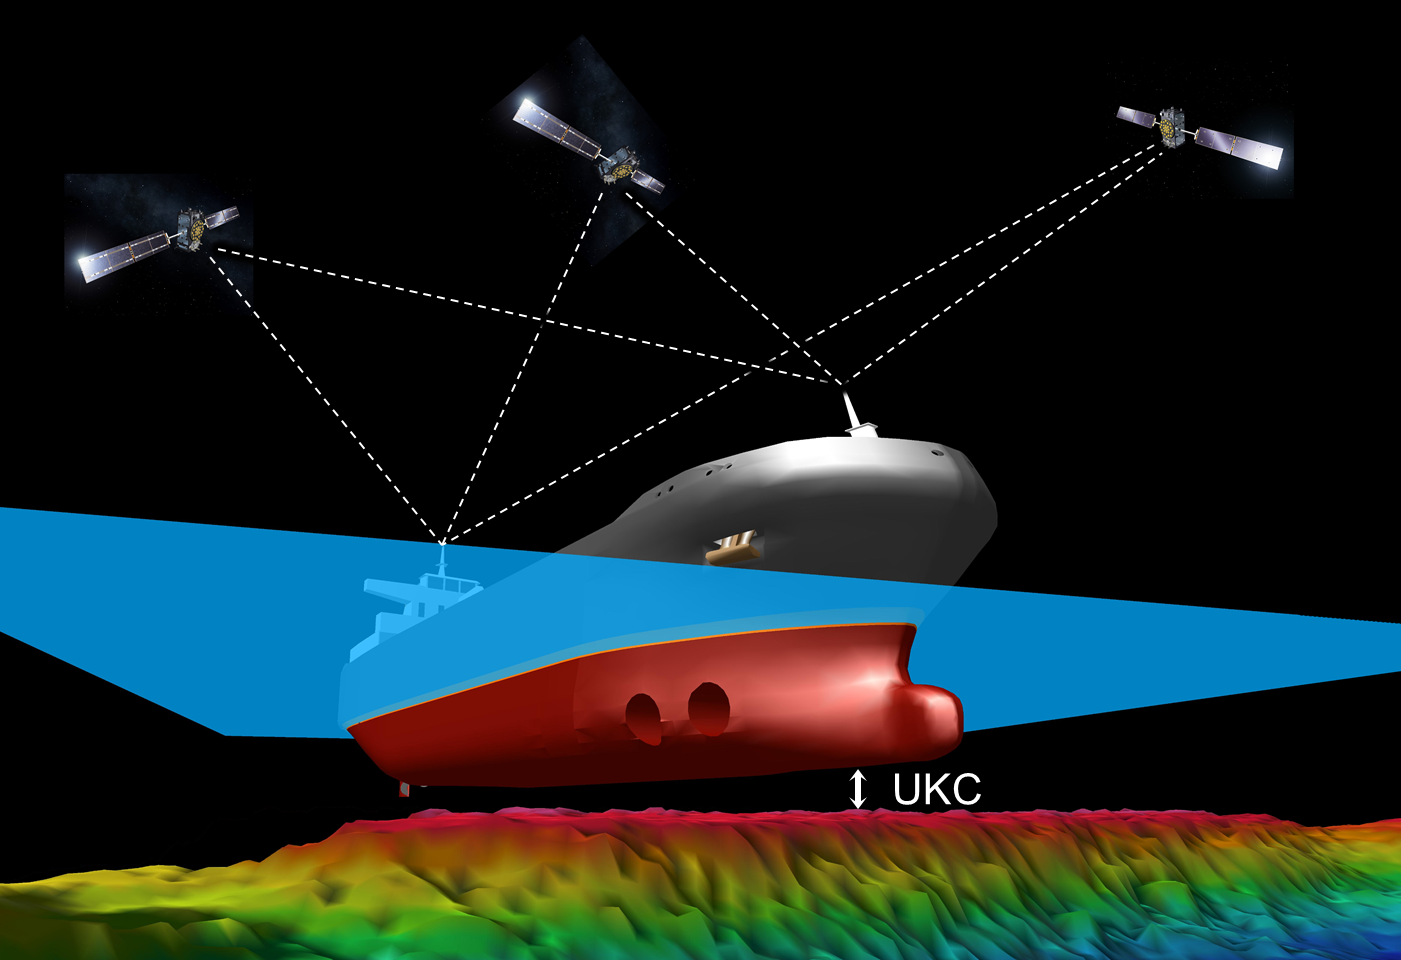 With sufficiently accurate satellite positioning and a compatible chart datum, the calculation of the actual Under Keel Clearance could be implemented an easy-to-use function in a vessel's navigation system. Information about the water level would then mostly be needed for voyage planning, and become a much less important parameter for navigation.